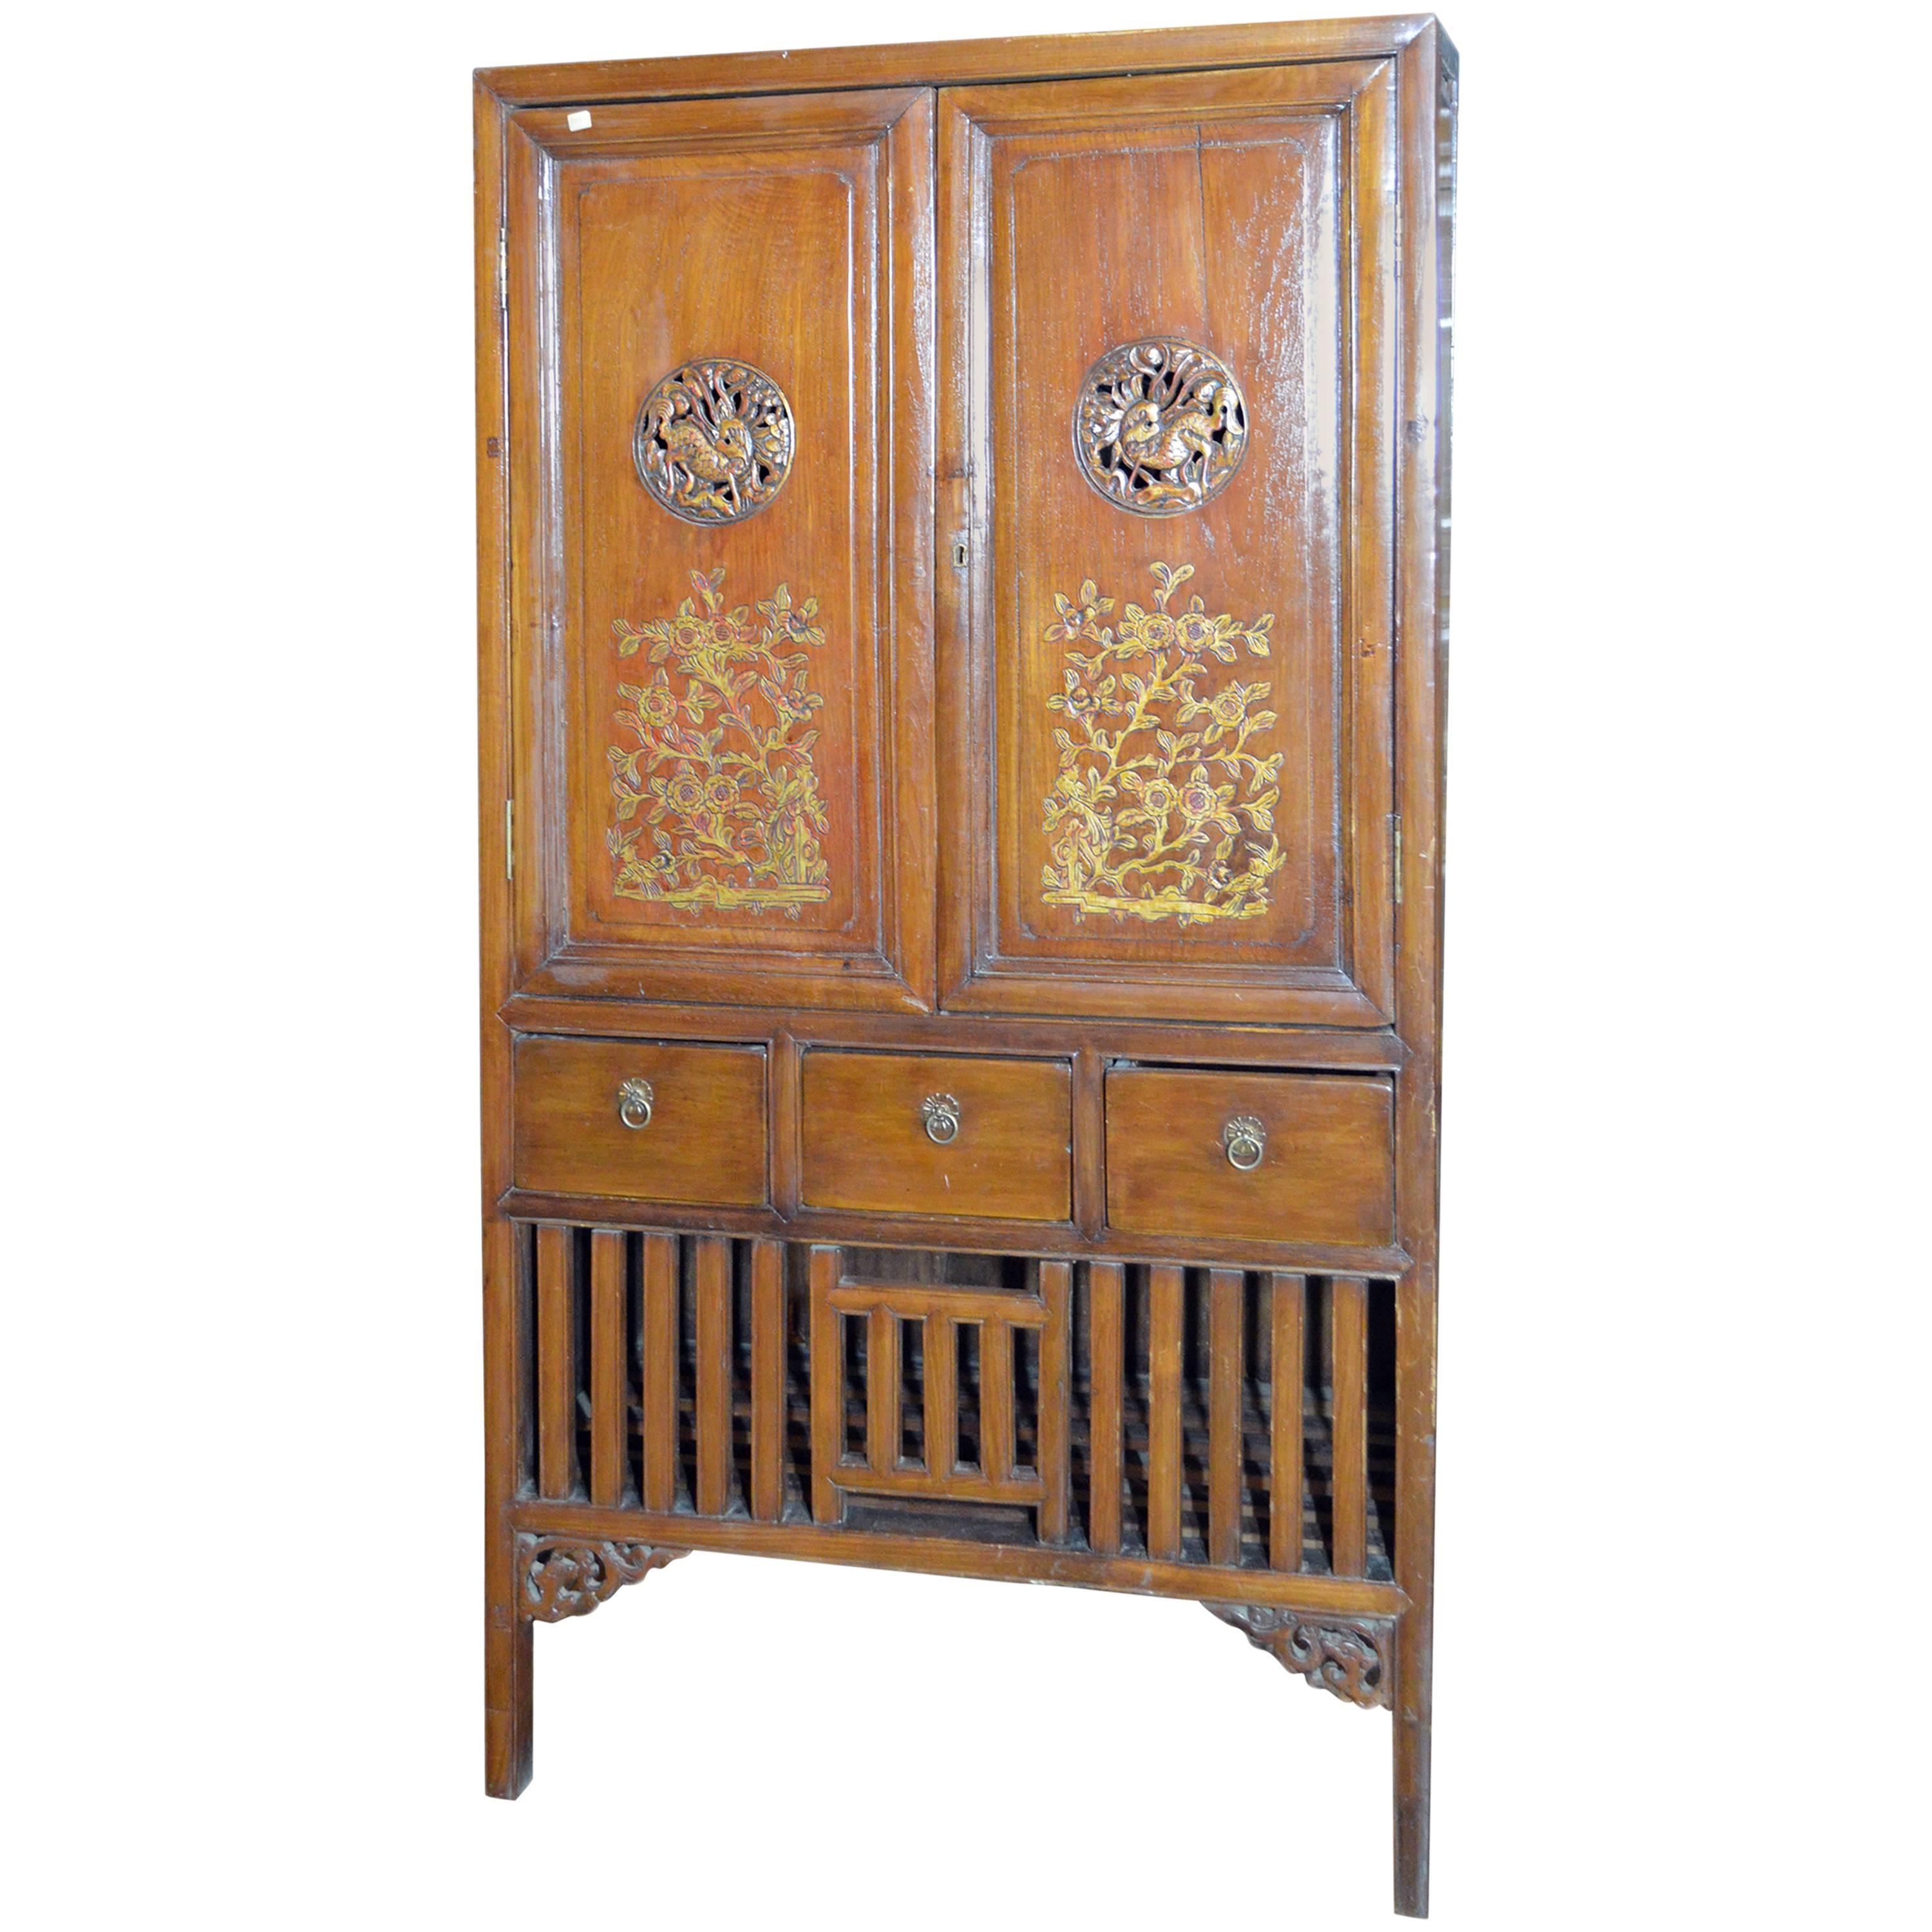 Early 20th Century Chinese Armoire with Gilt Motifs and Hand-Carved Medallions